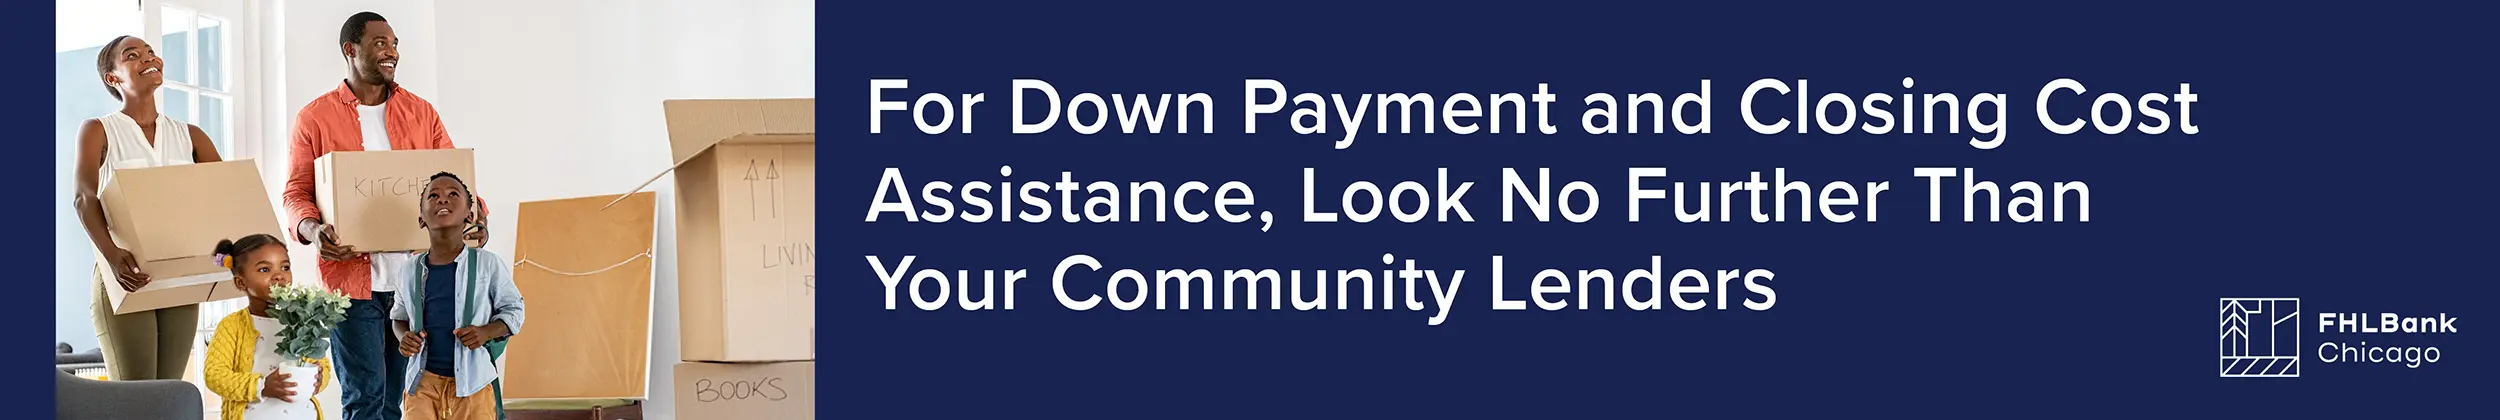 For Down Payment and Closing Cost Assistance, Look No Further Than Your Community Lenders